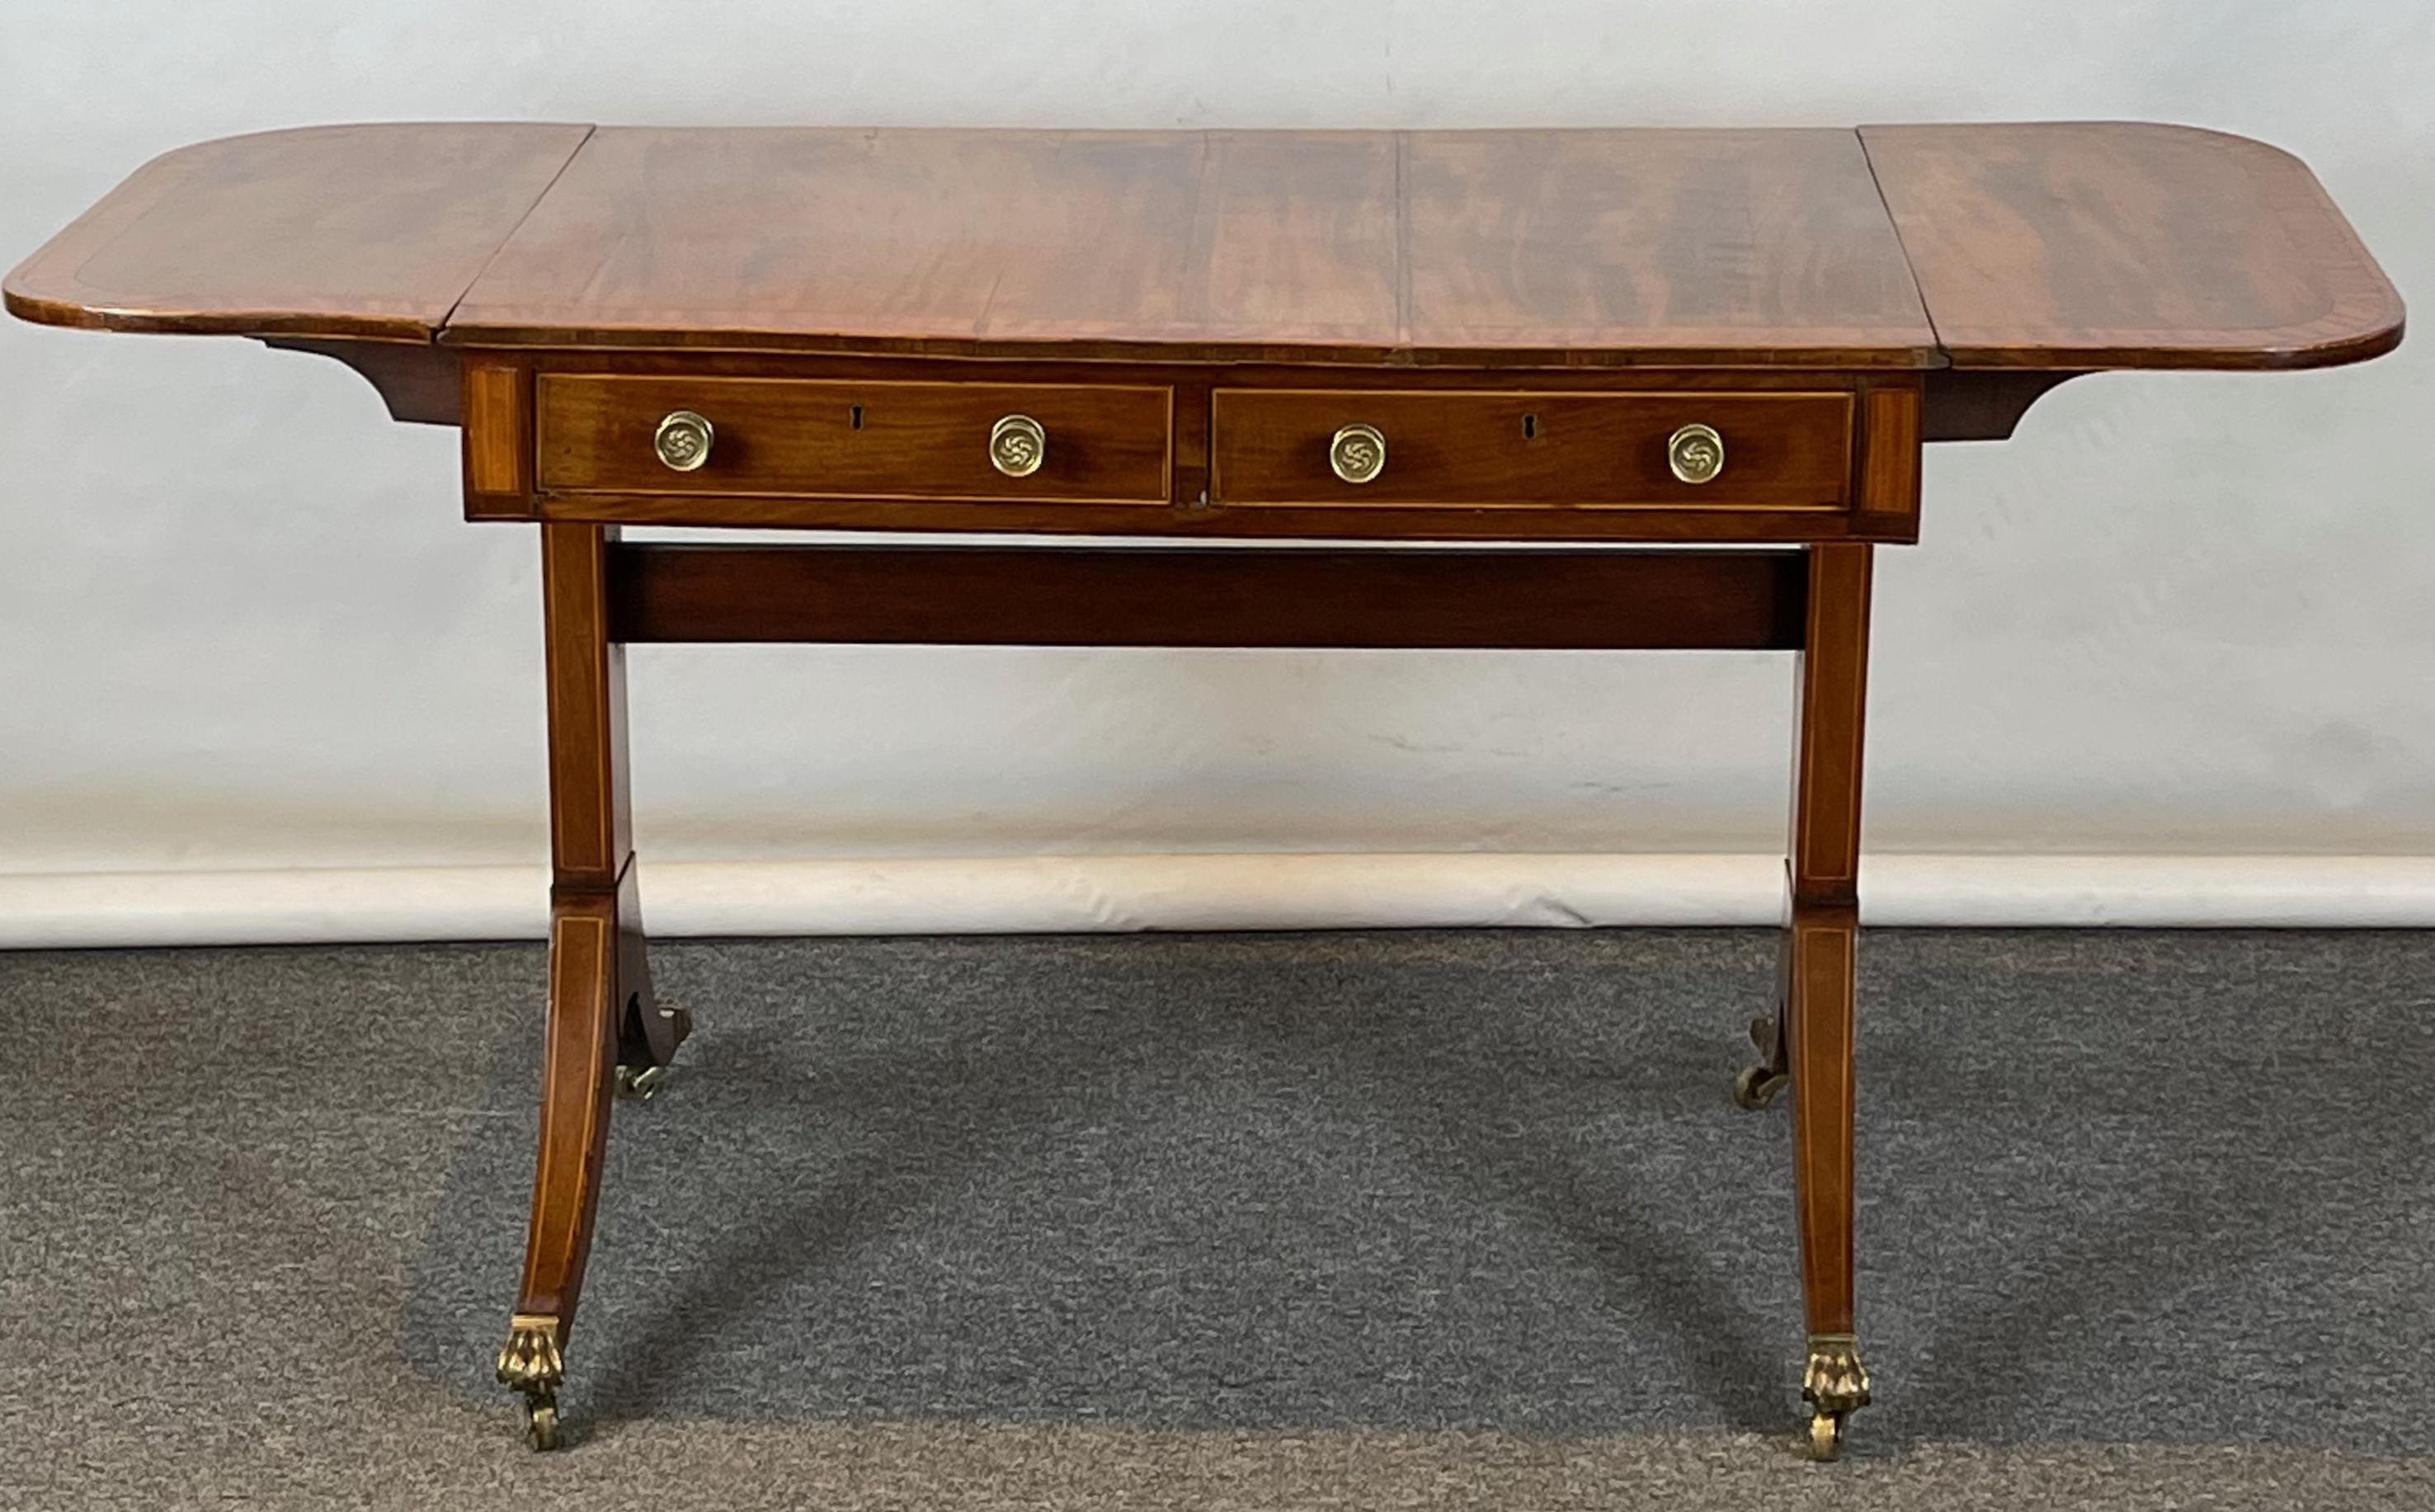 Hand-Crafted Early 19th Century English Regency Sofa Table